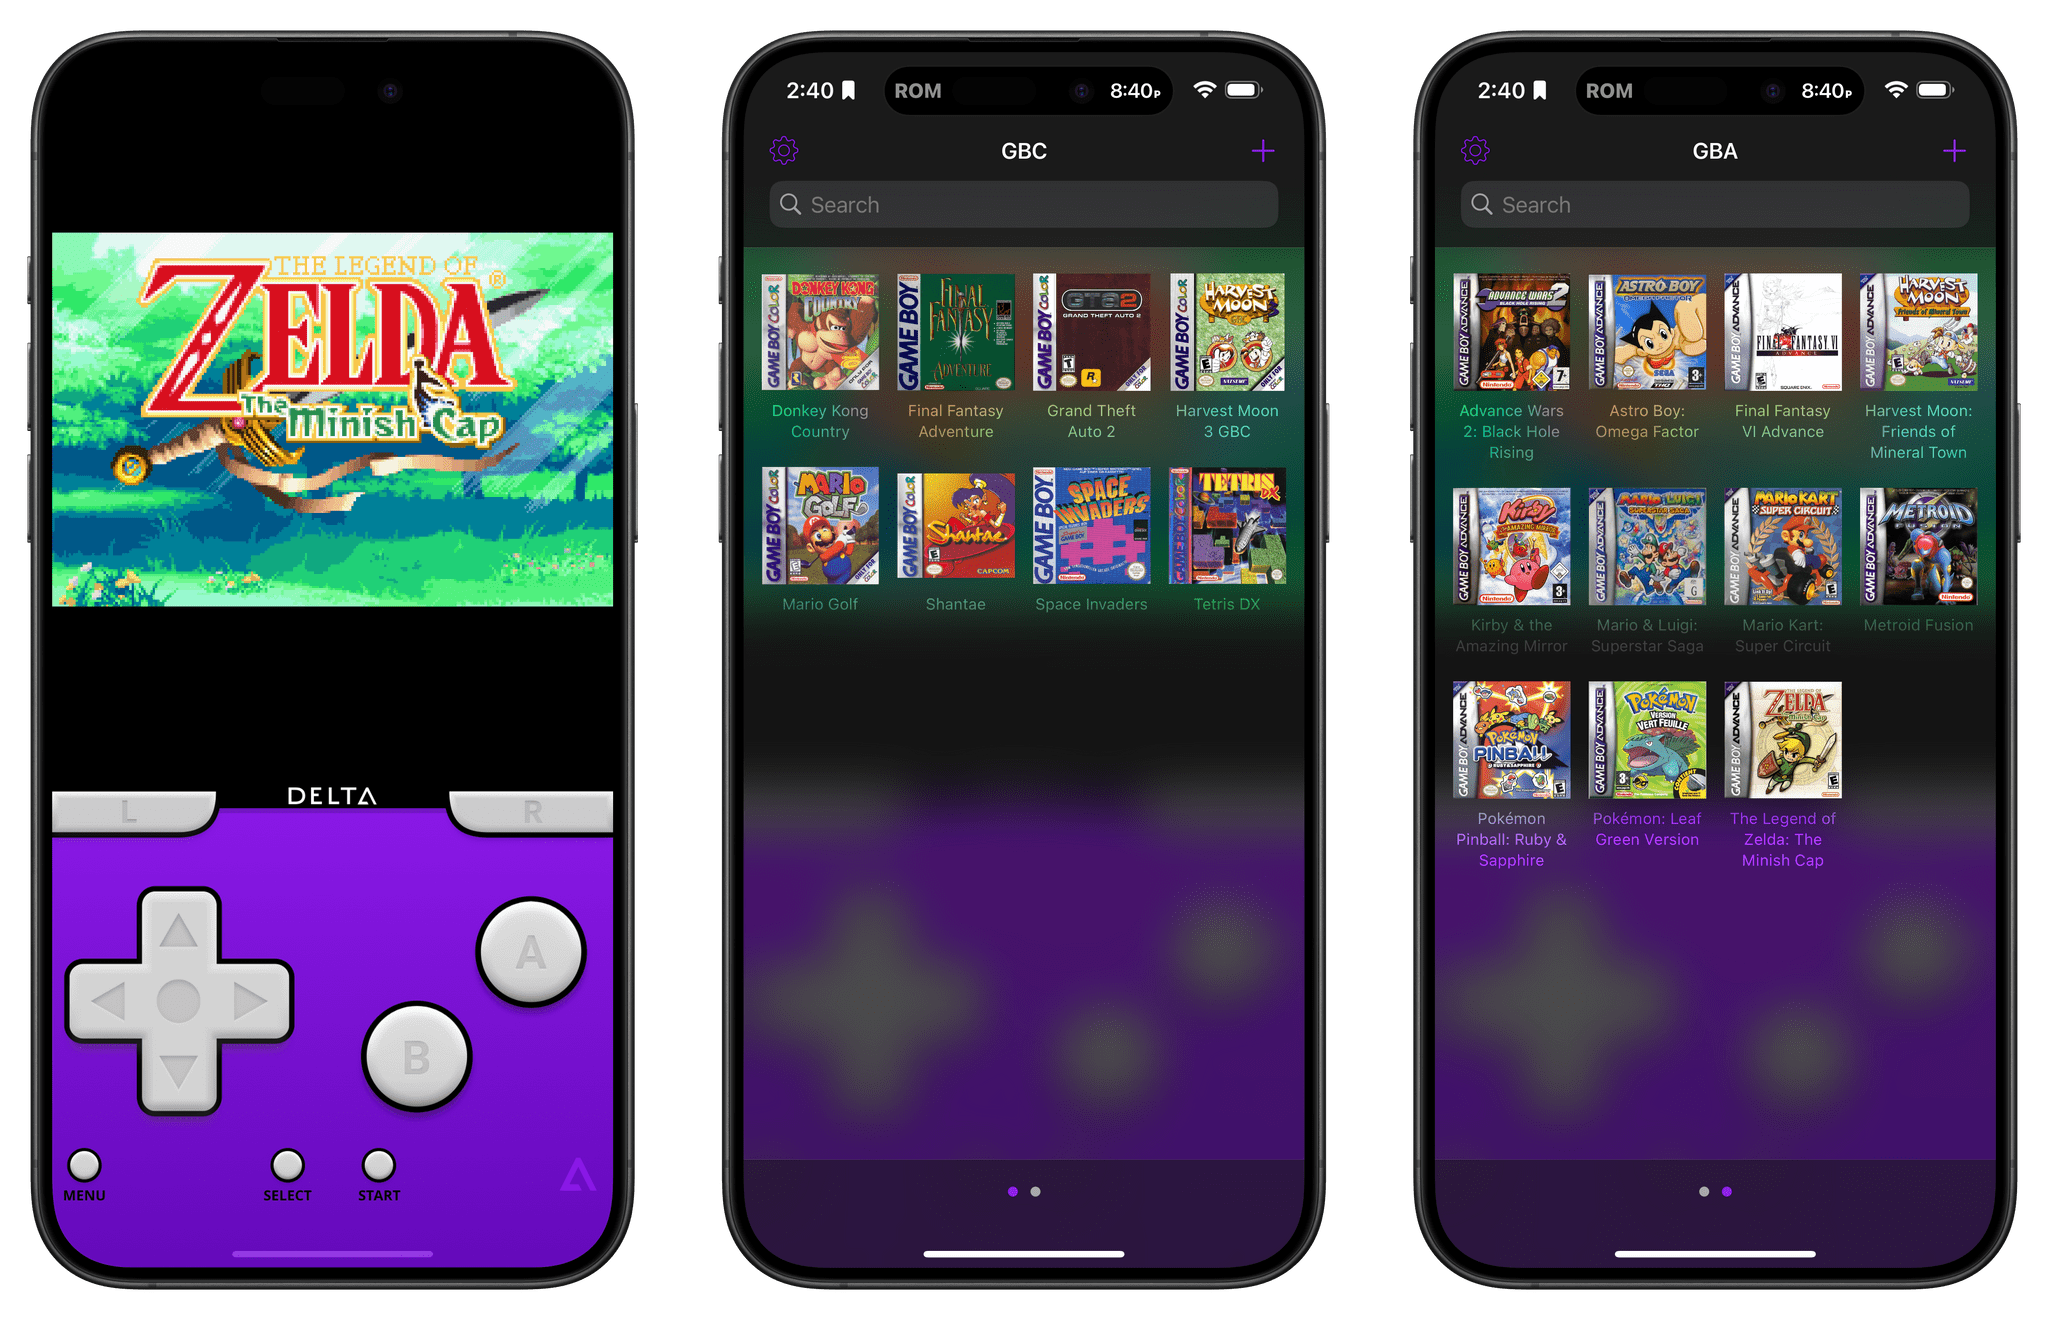 The Delta Videogame Emulator Launches on the App Store